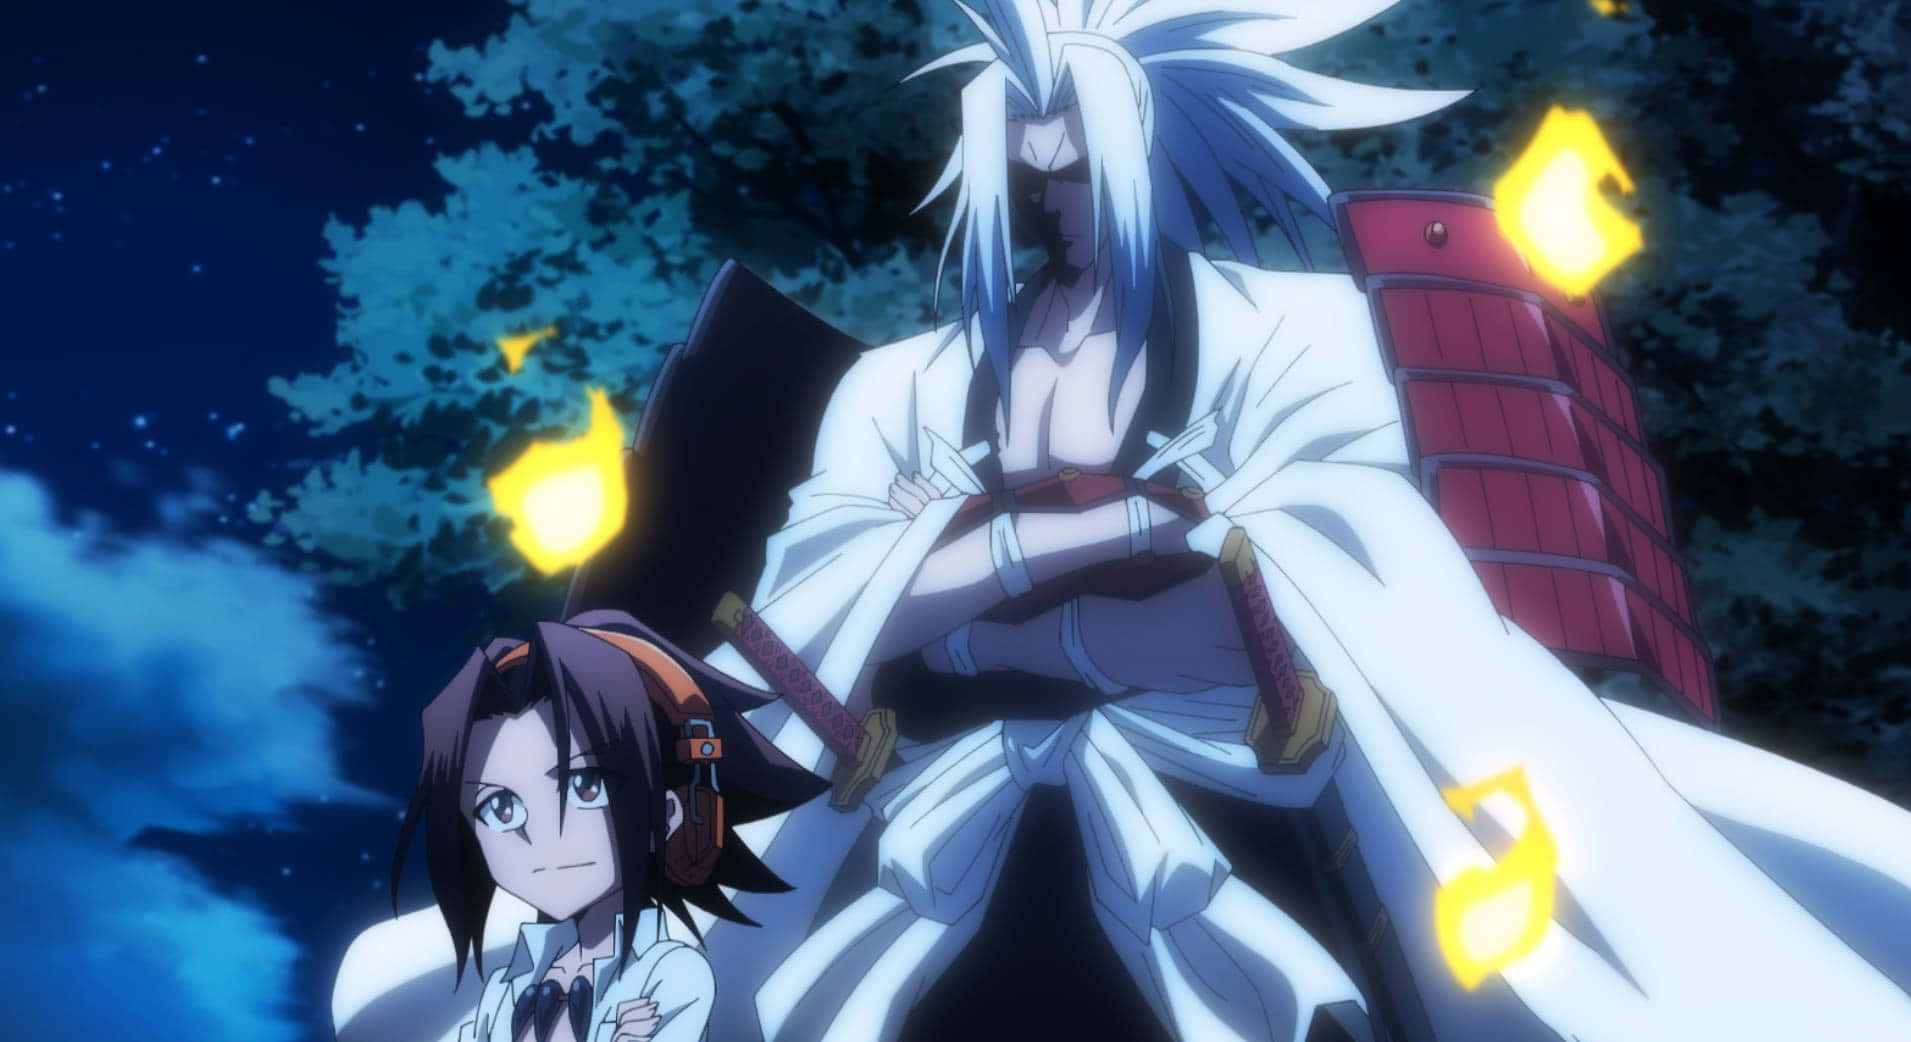 "The deep and enigmatic world of Shaman King awaits!"